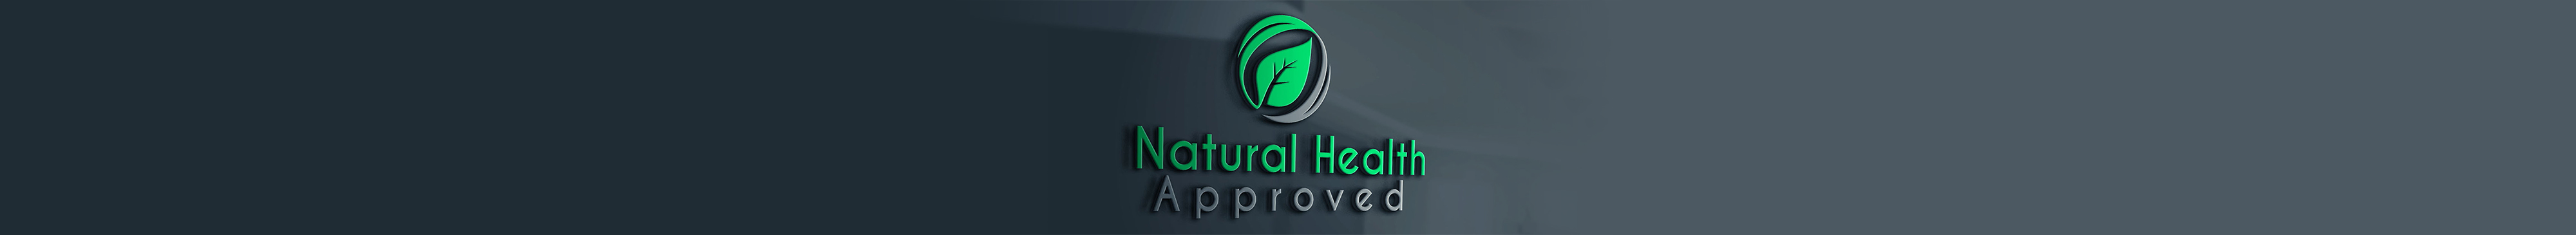 Natural Health Approved